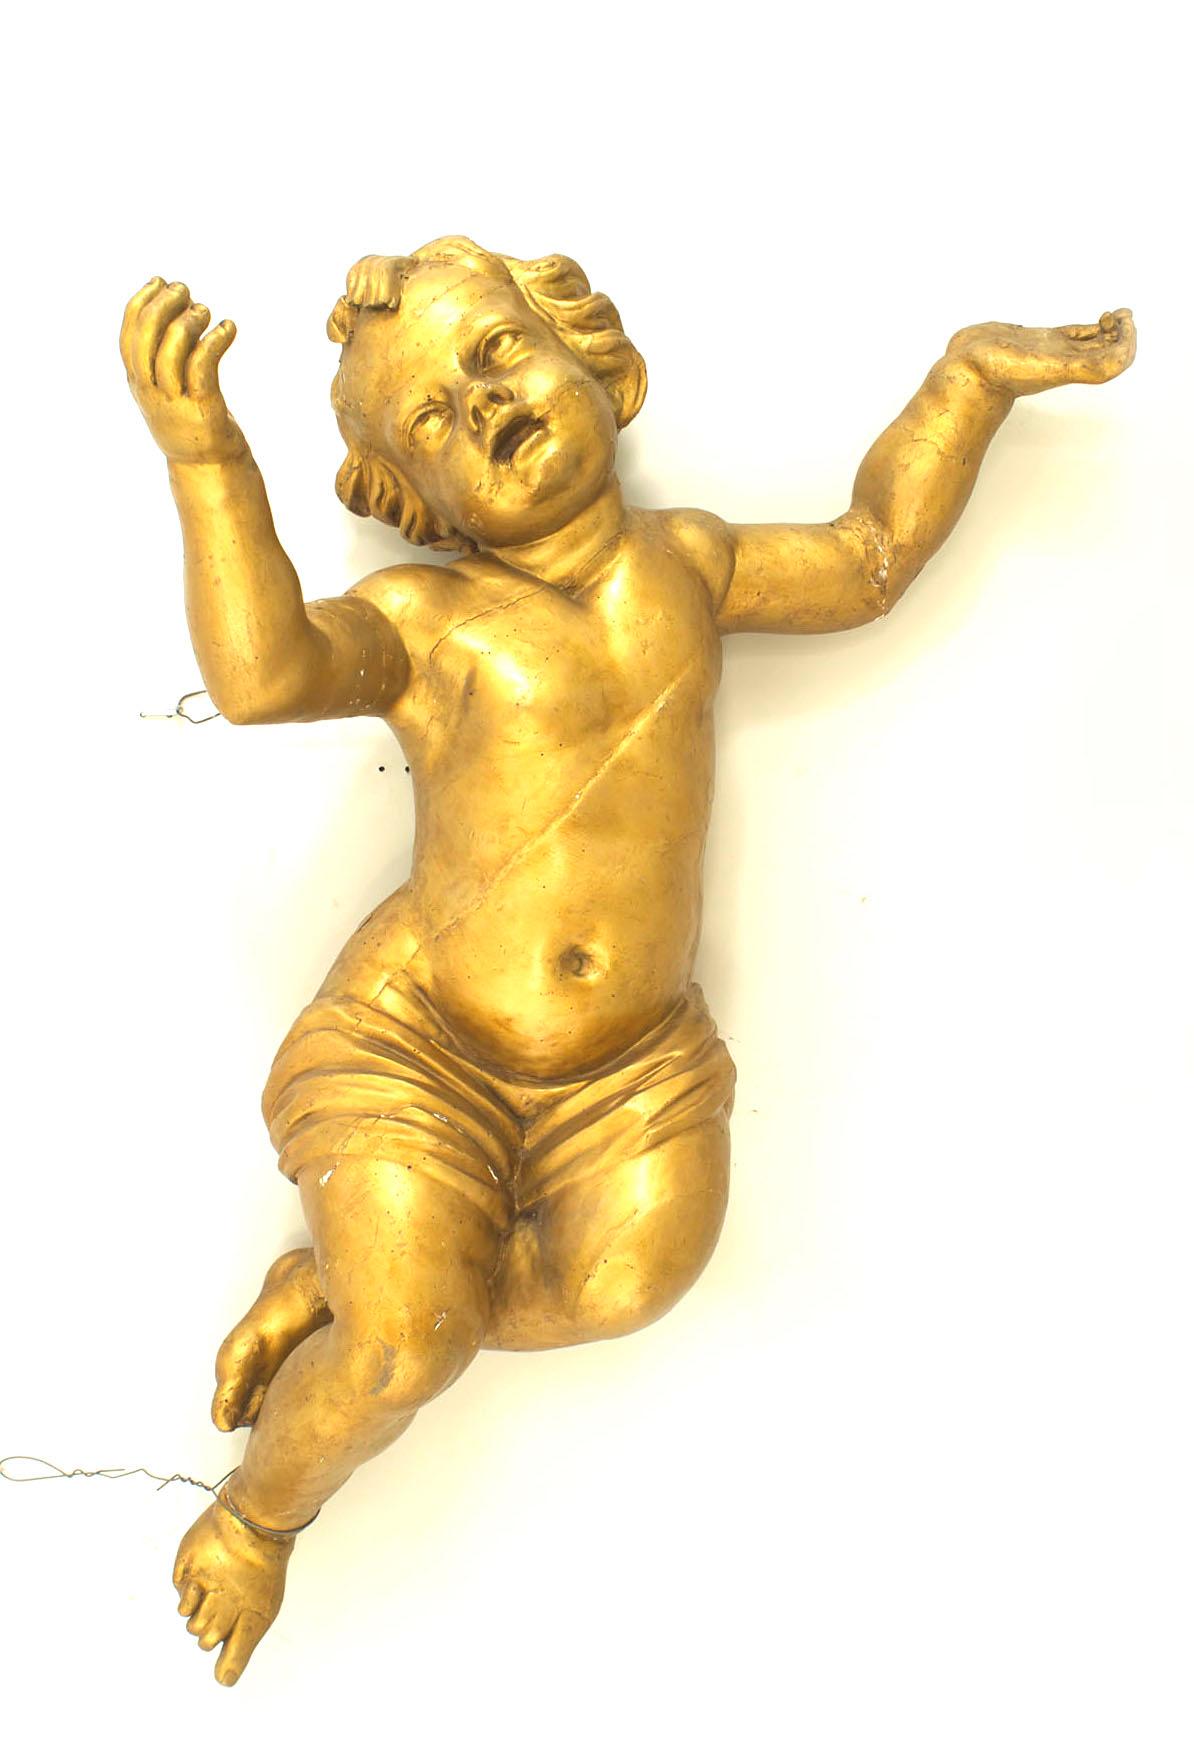 Pair of Italian Rococo style gold painted large hanging cupid figures.(18/19th Cent)
